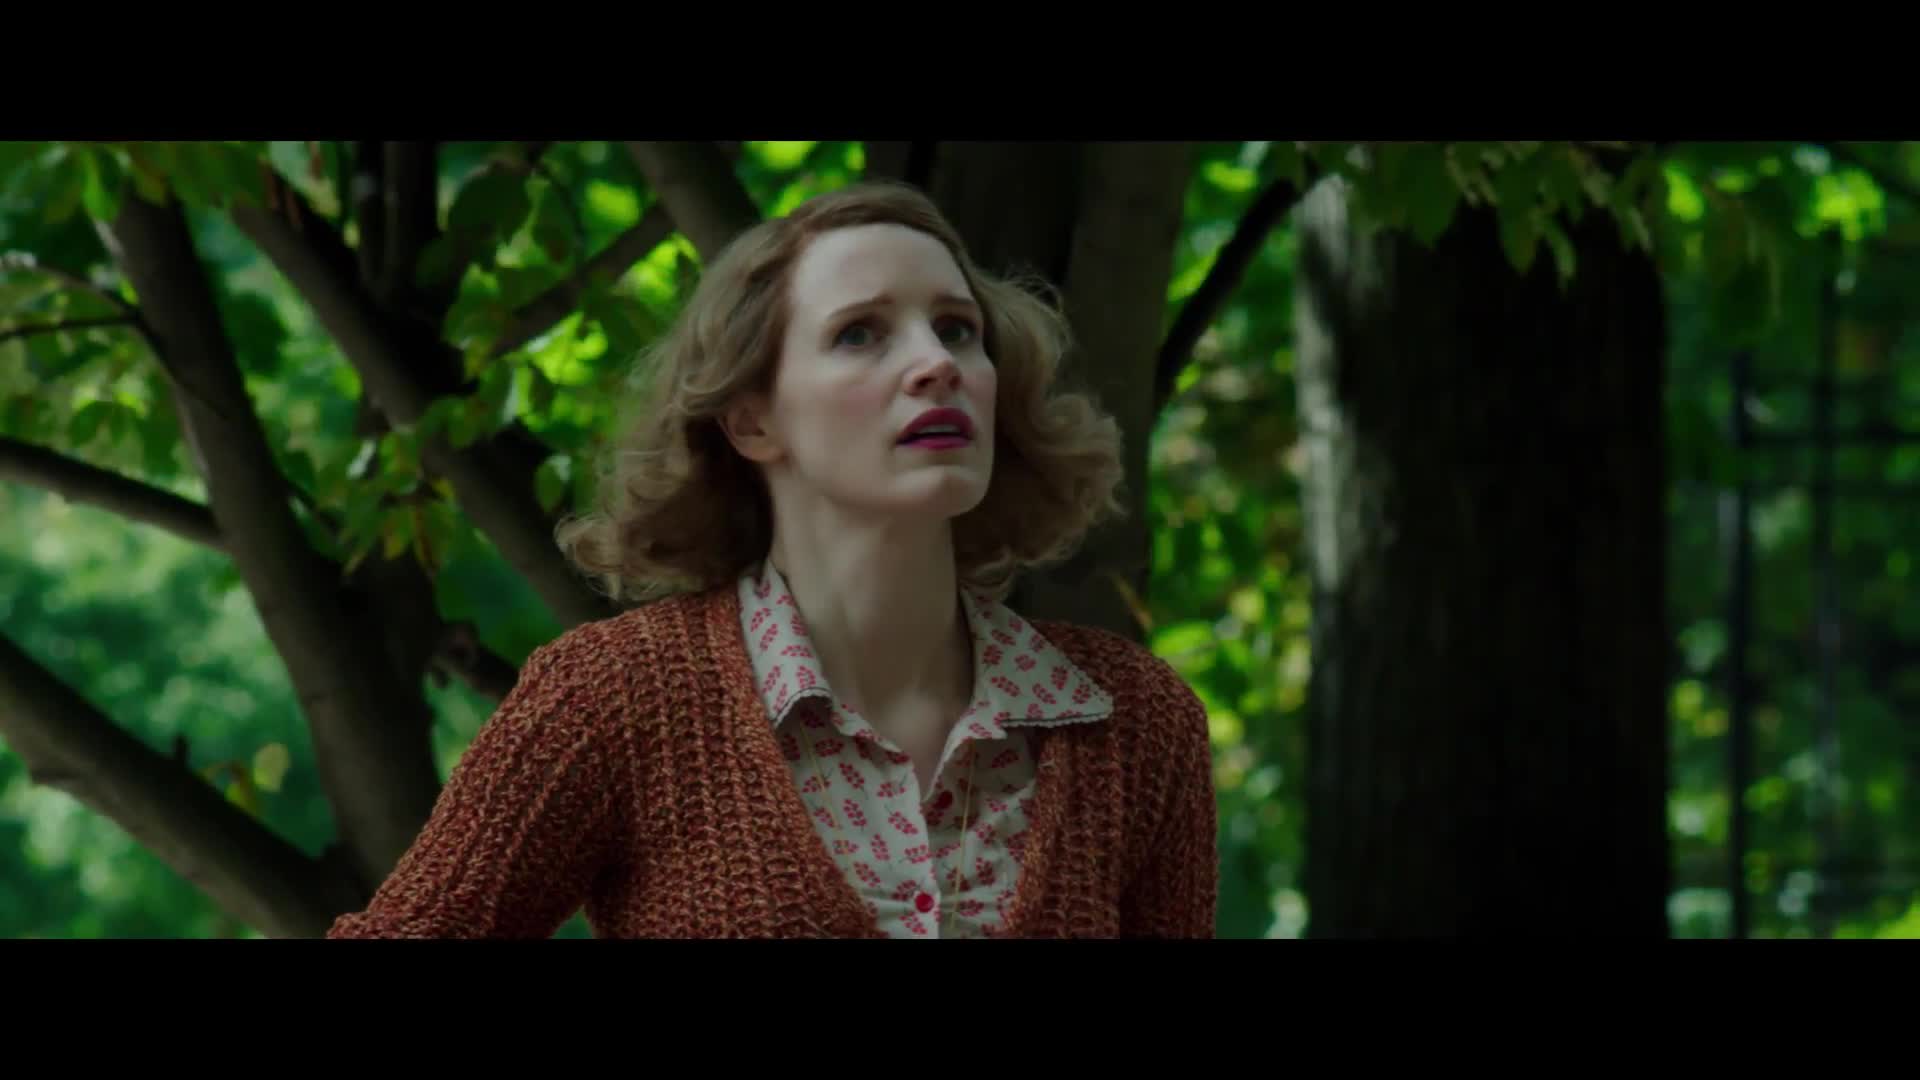 Watch How Jessica Chastain Became a WW2 Resistance Fighter in “The ...